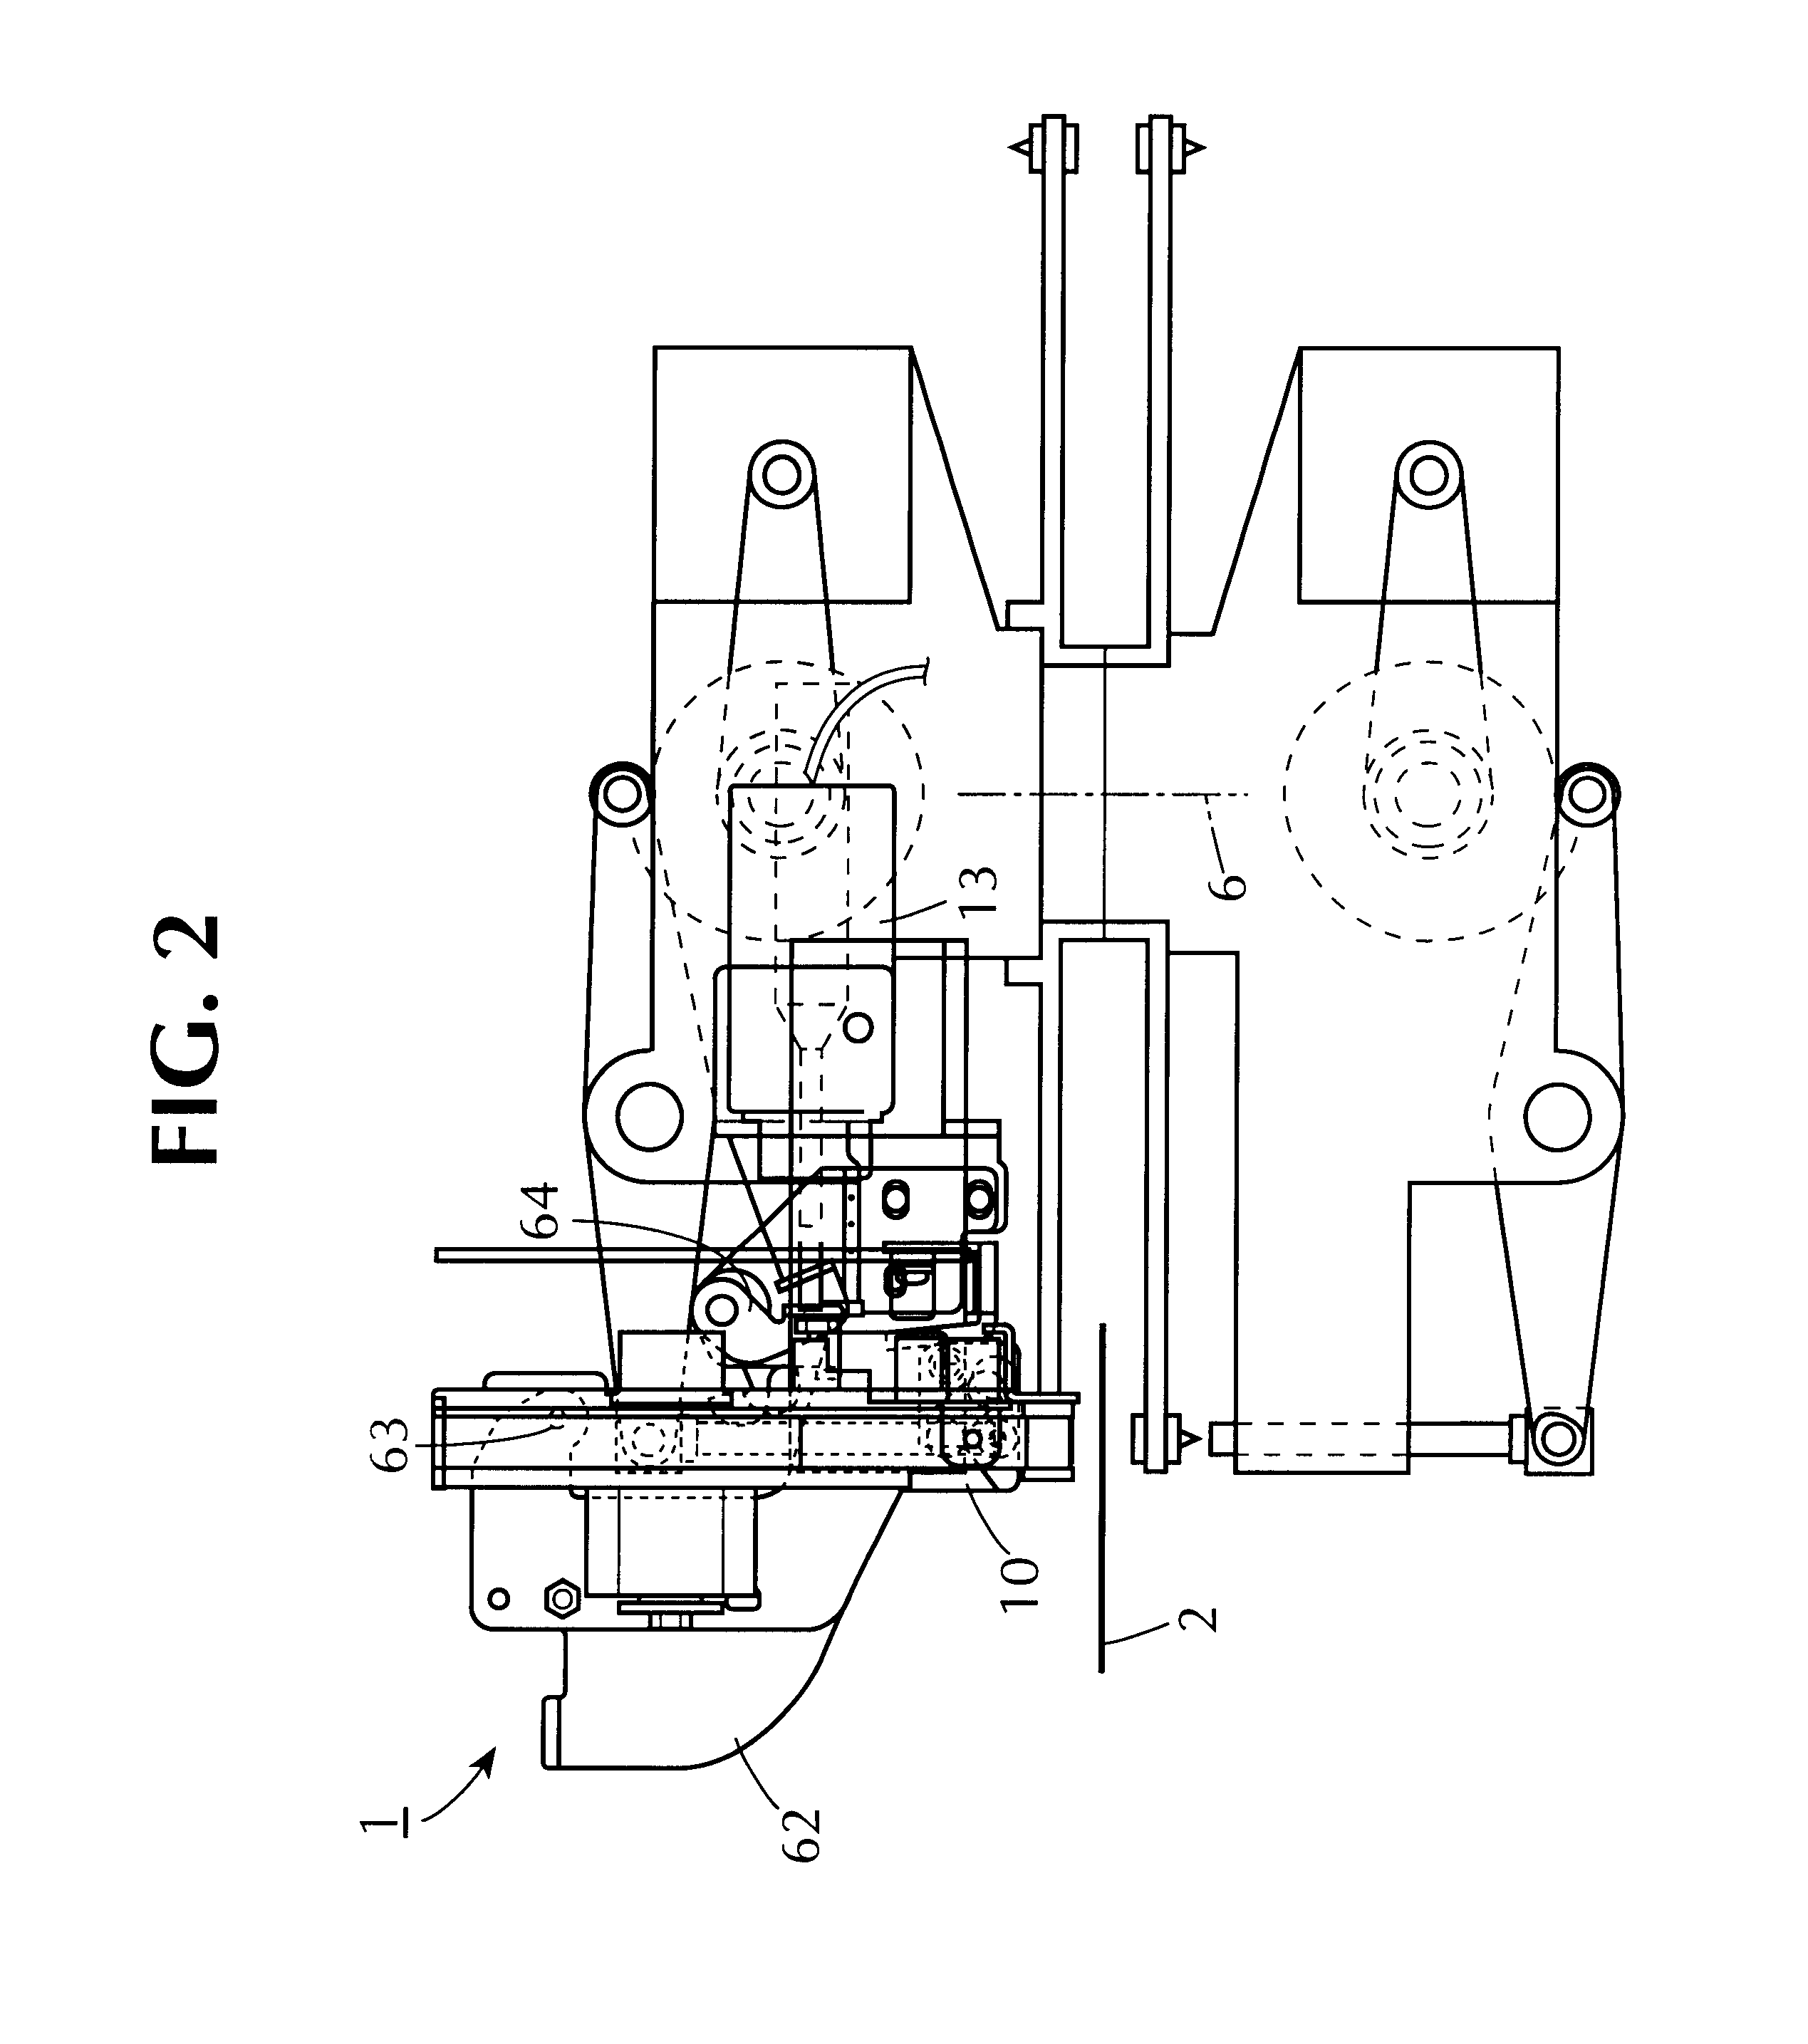 Marking press device for producing raised symbols with or without coloring